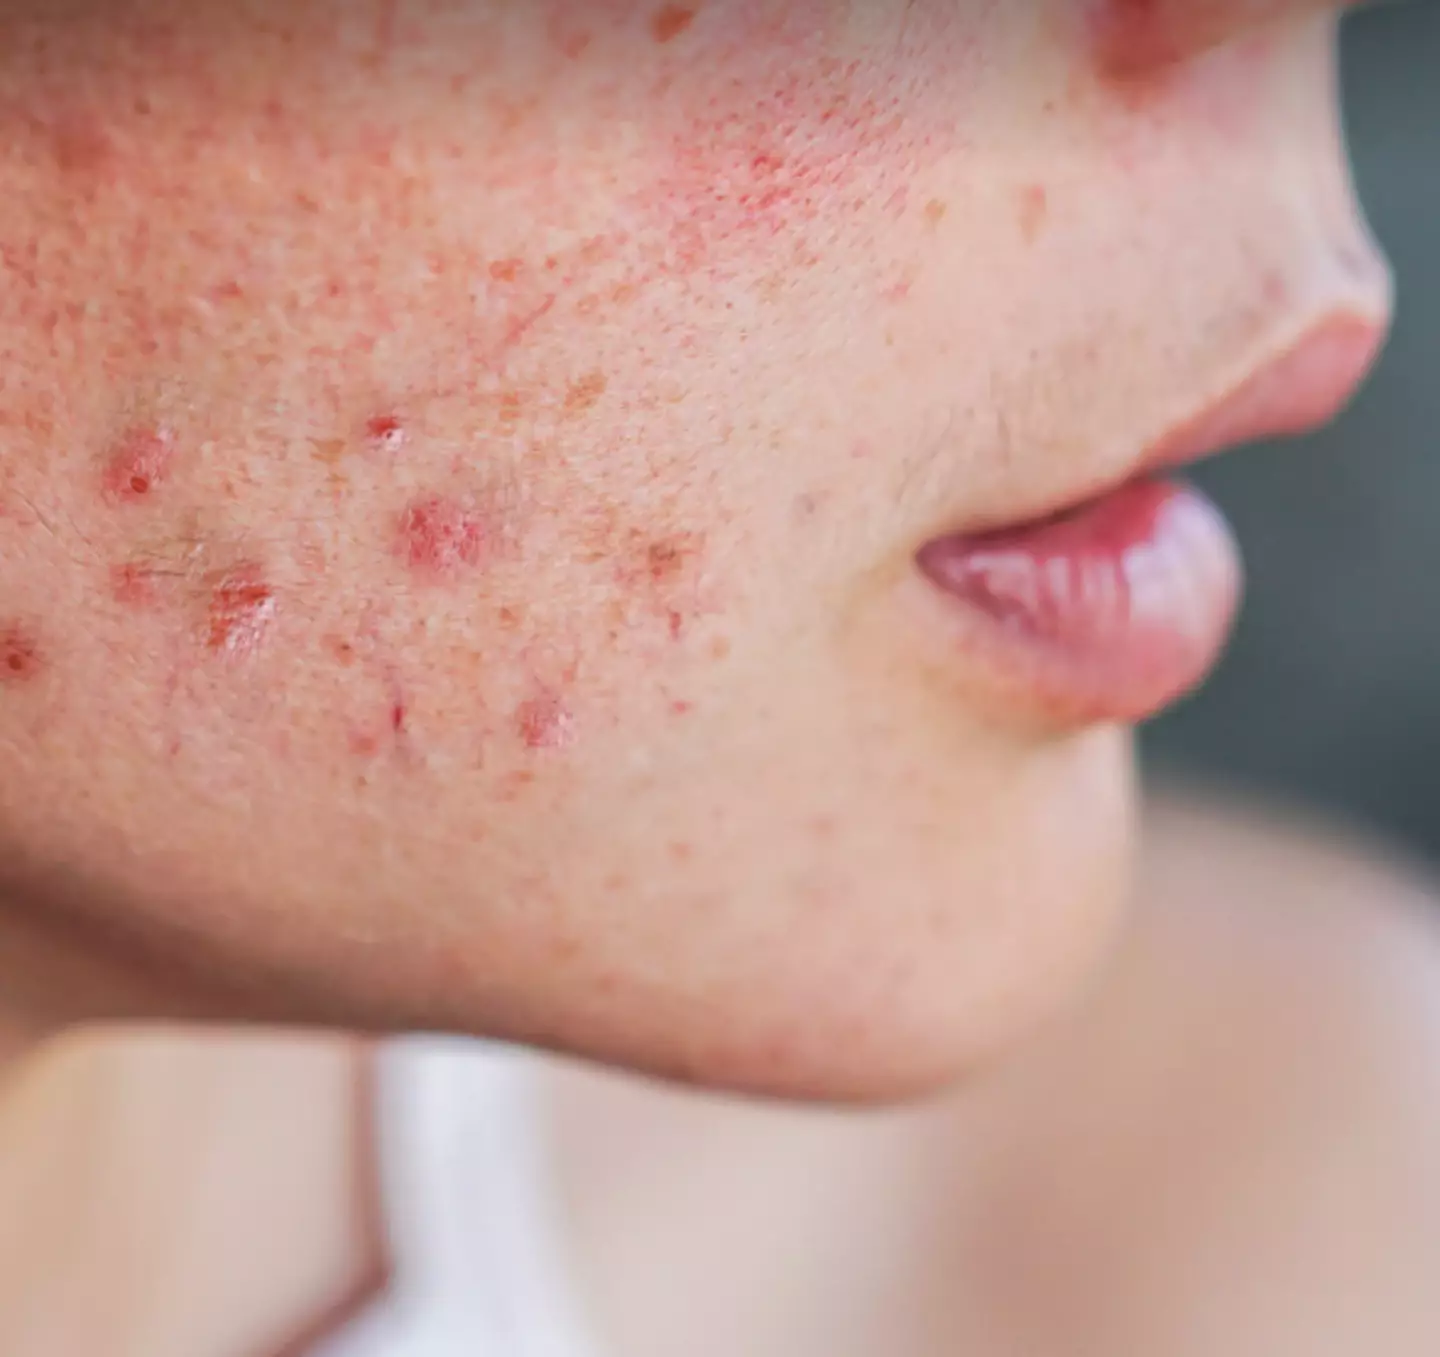 Acne affects 95% of people across the UK at some point (